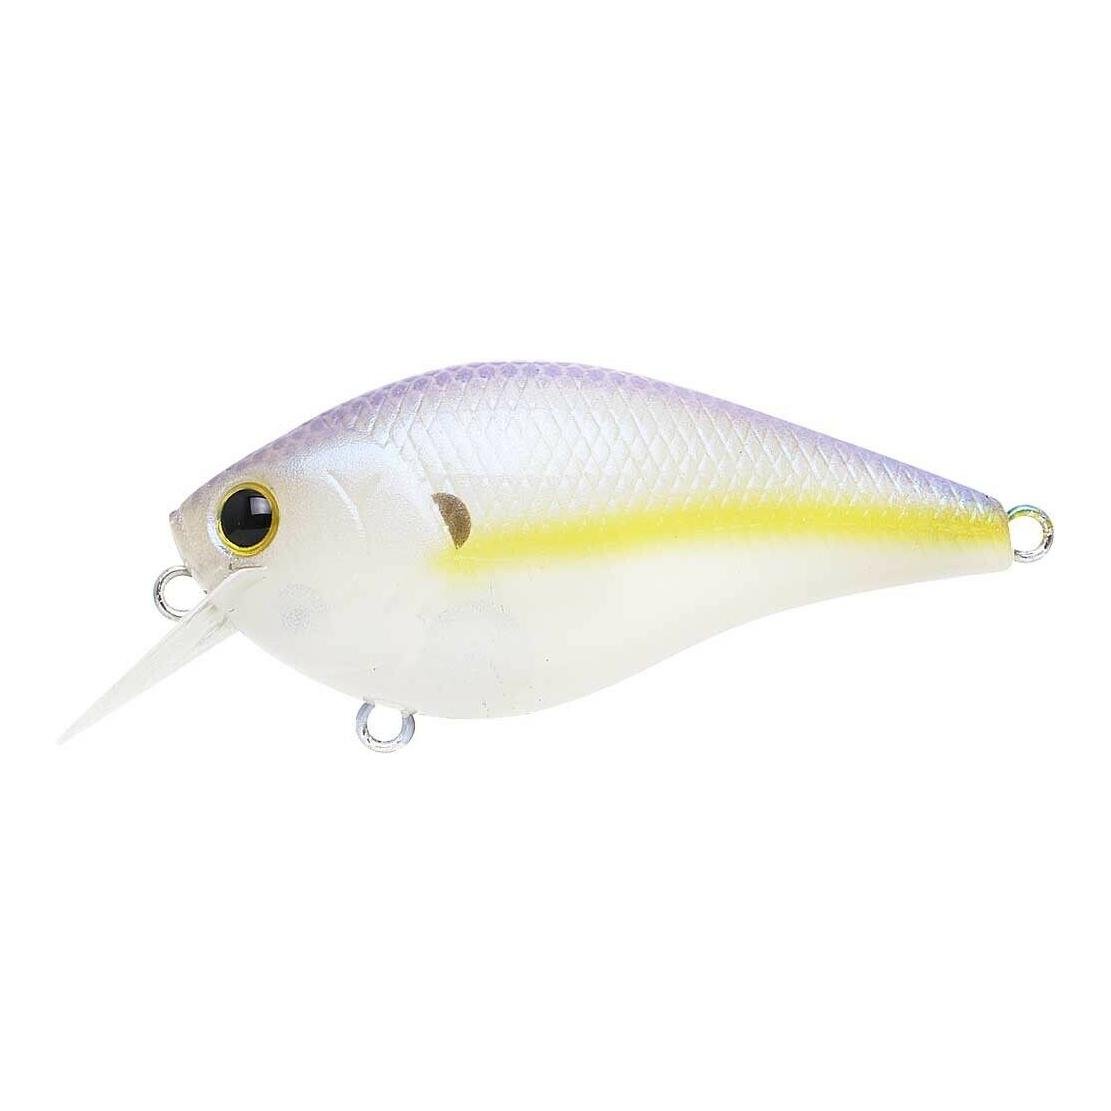 Image of Lucky Craft LC 0.3 Chartreuse Shad - Crankbait bei fischen.ch